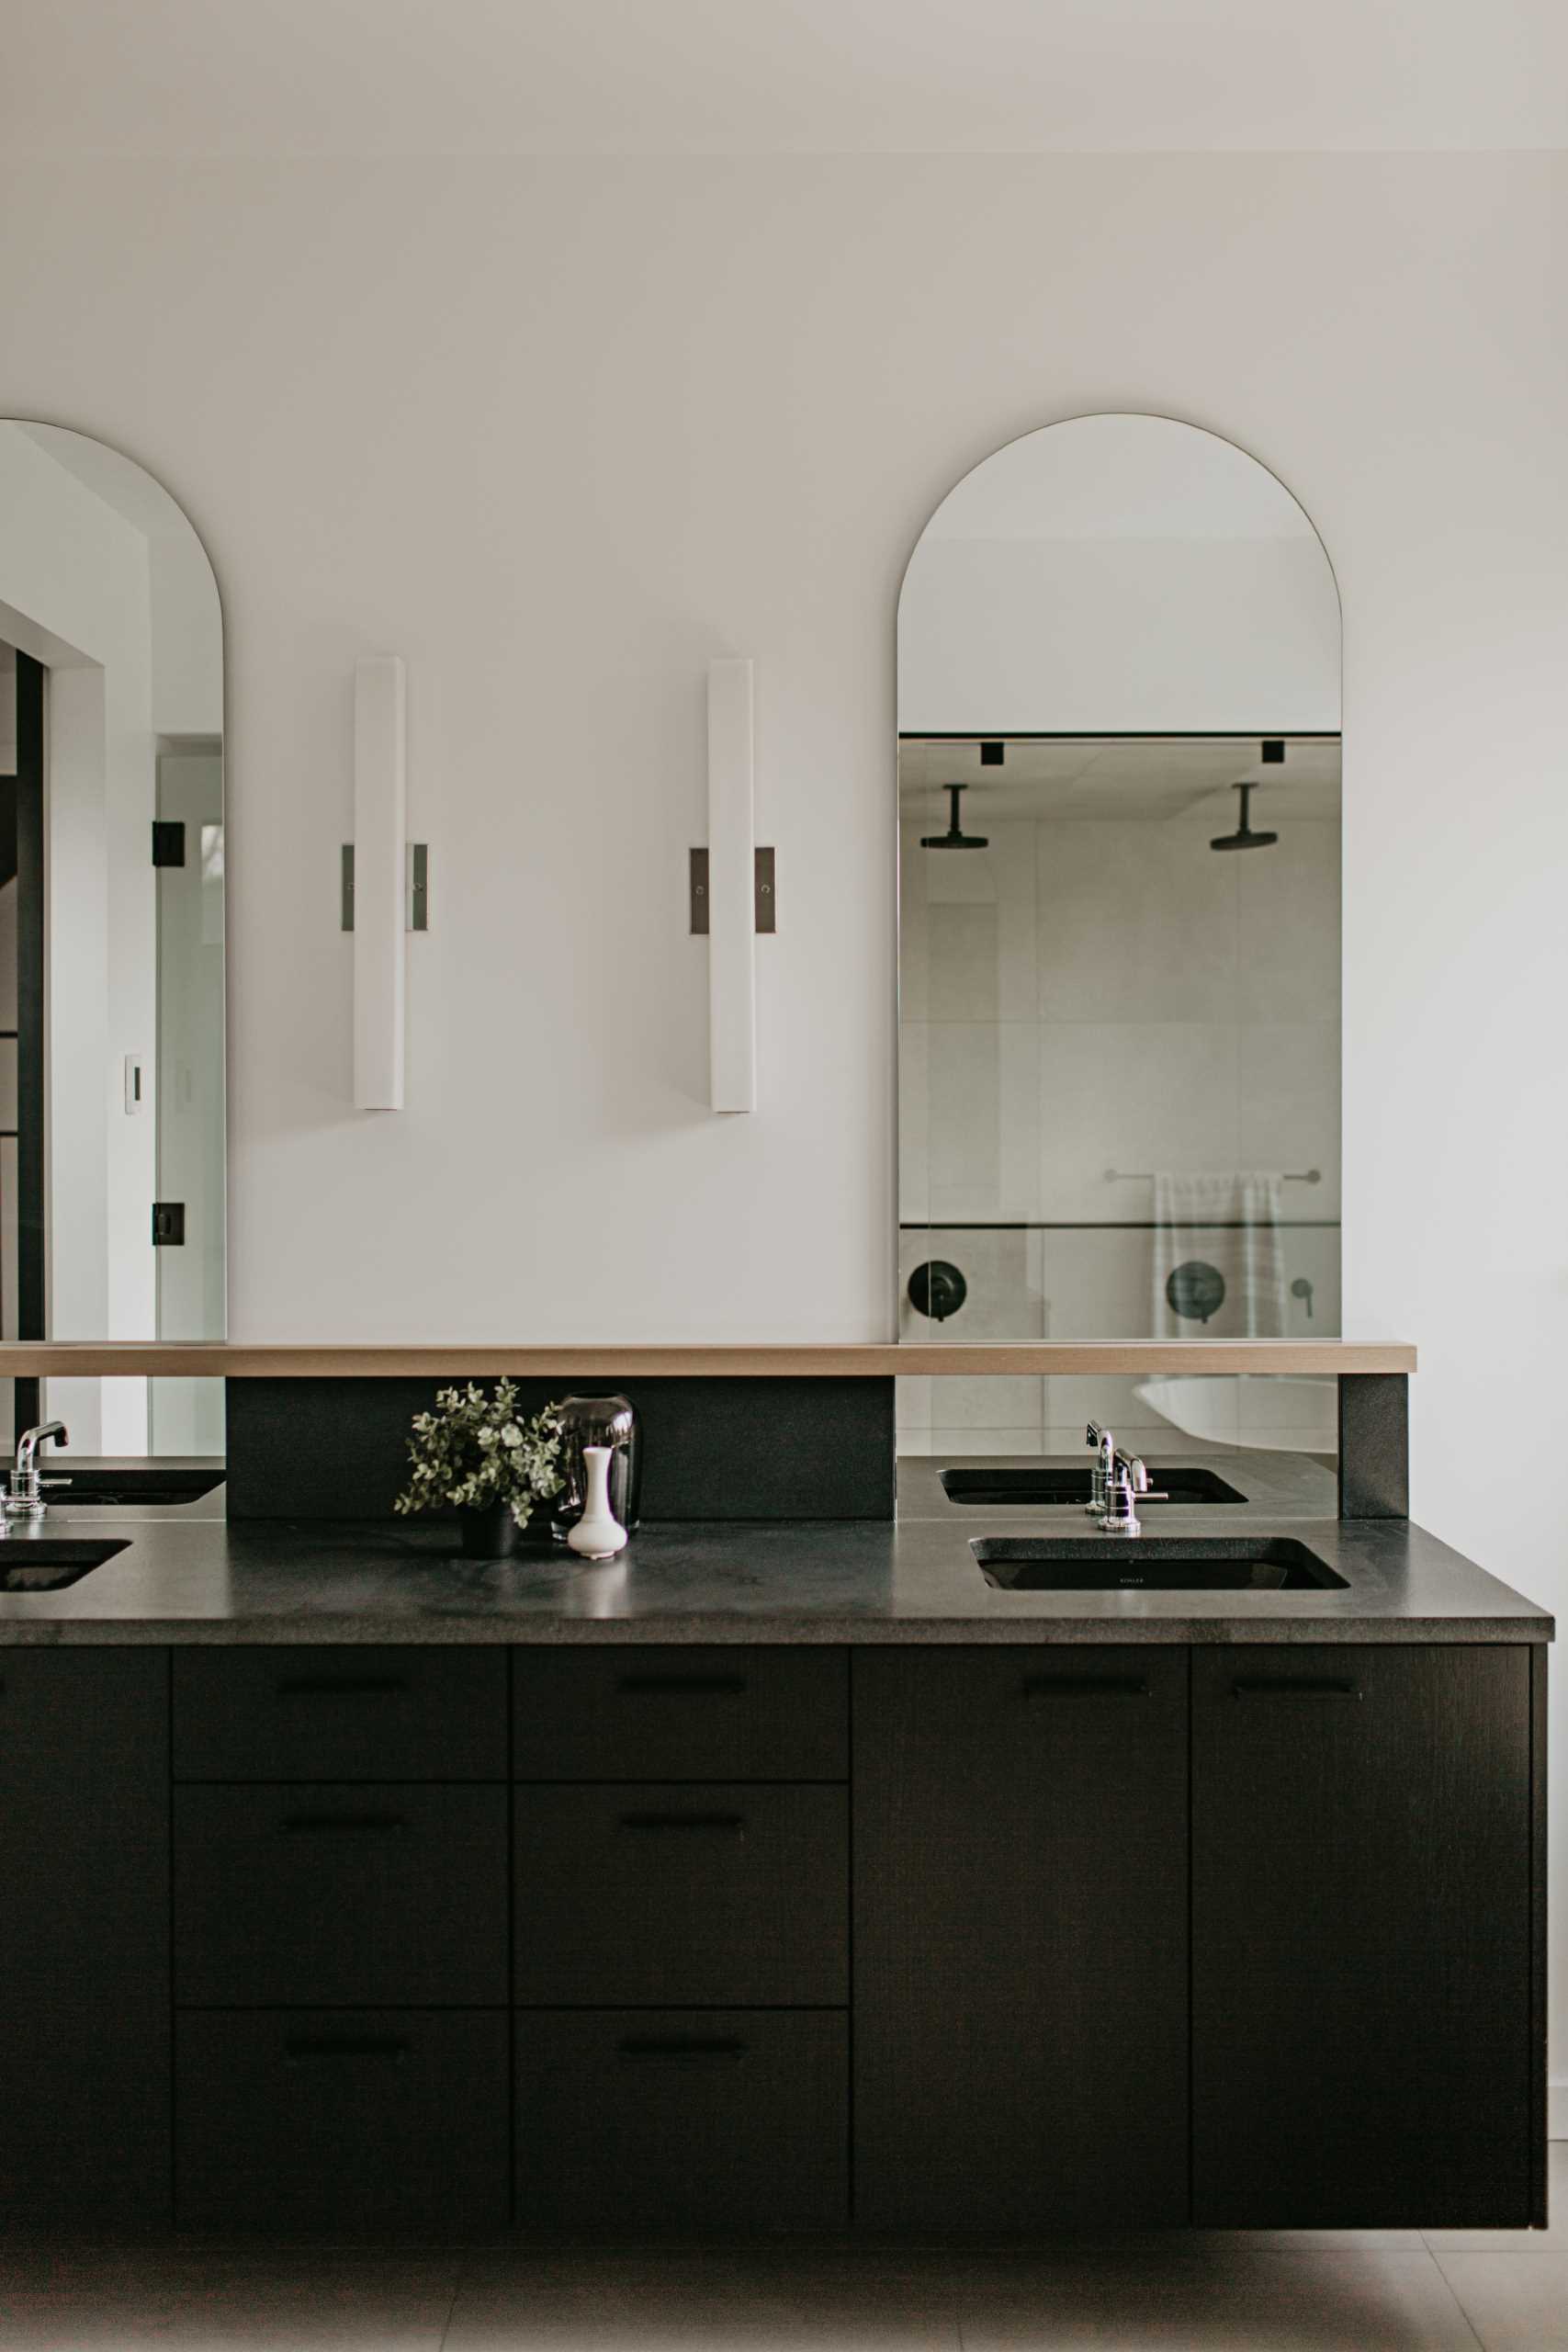 In the primary bathroom, grey and white tiles contrast with a black-on-black vanity, while curves are added with arched mirrors.